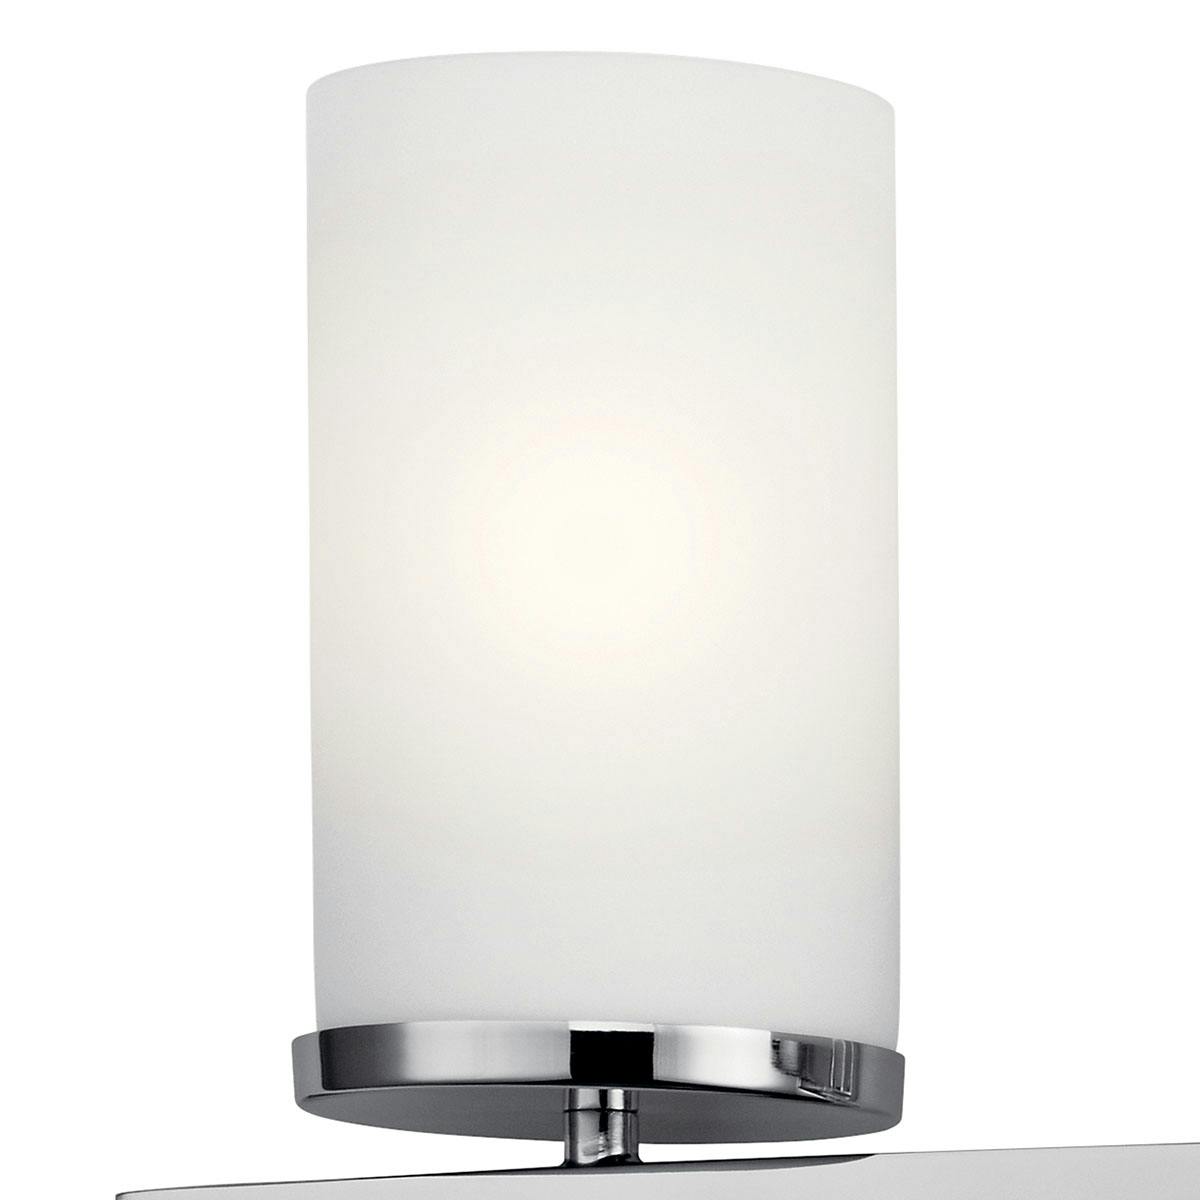 Close up view of the Crosby 31" Vanity Light in Chrome on a white background